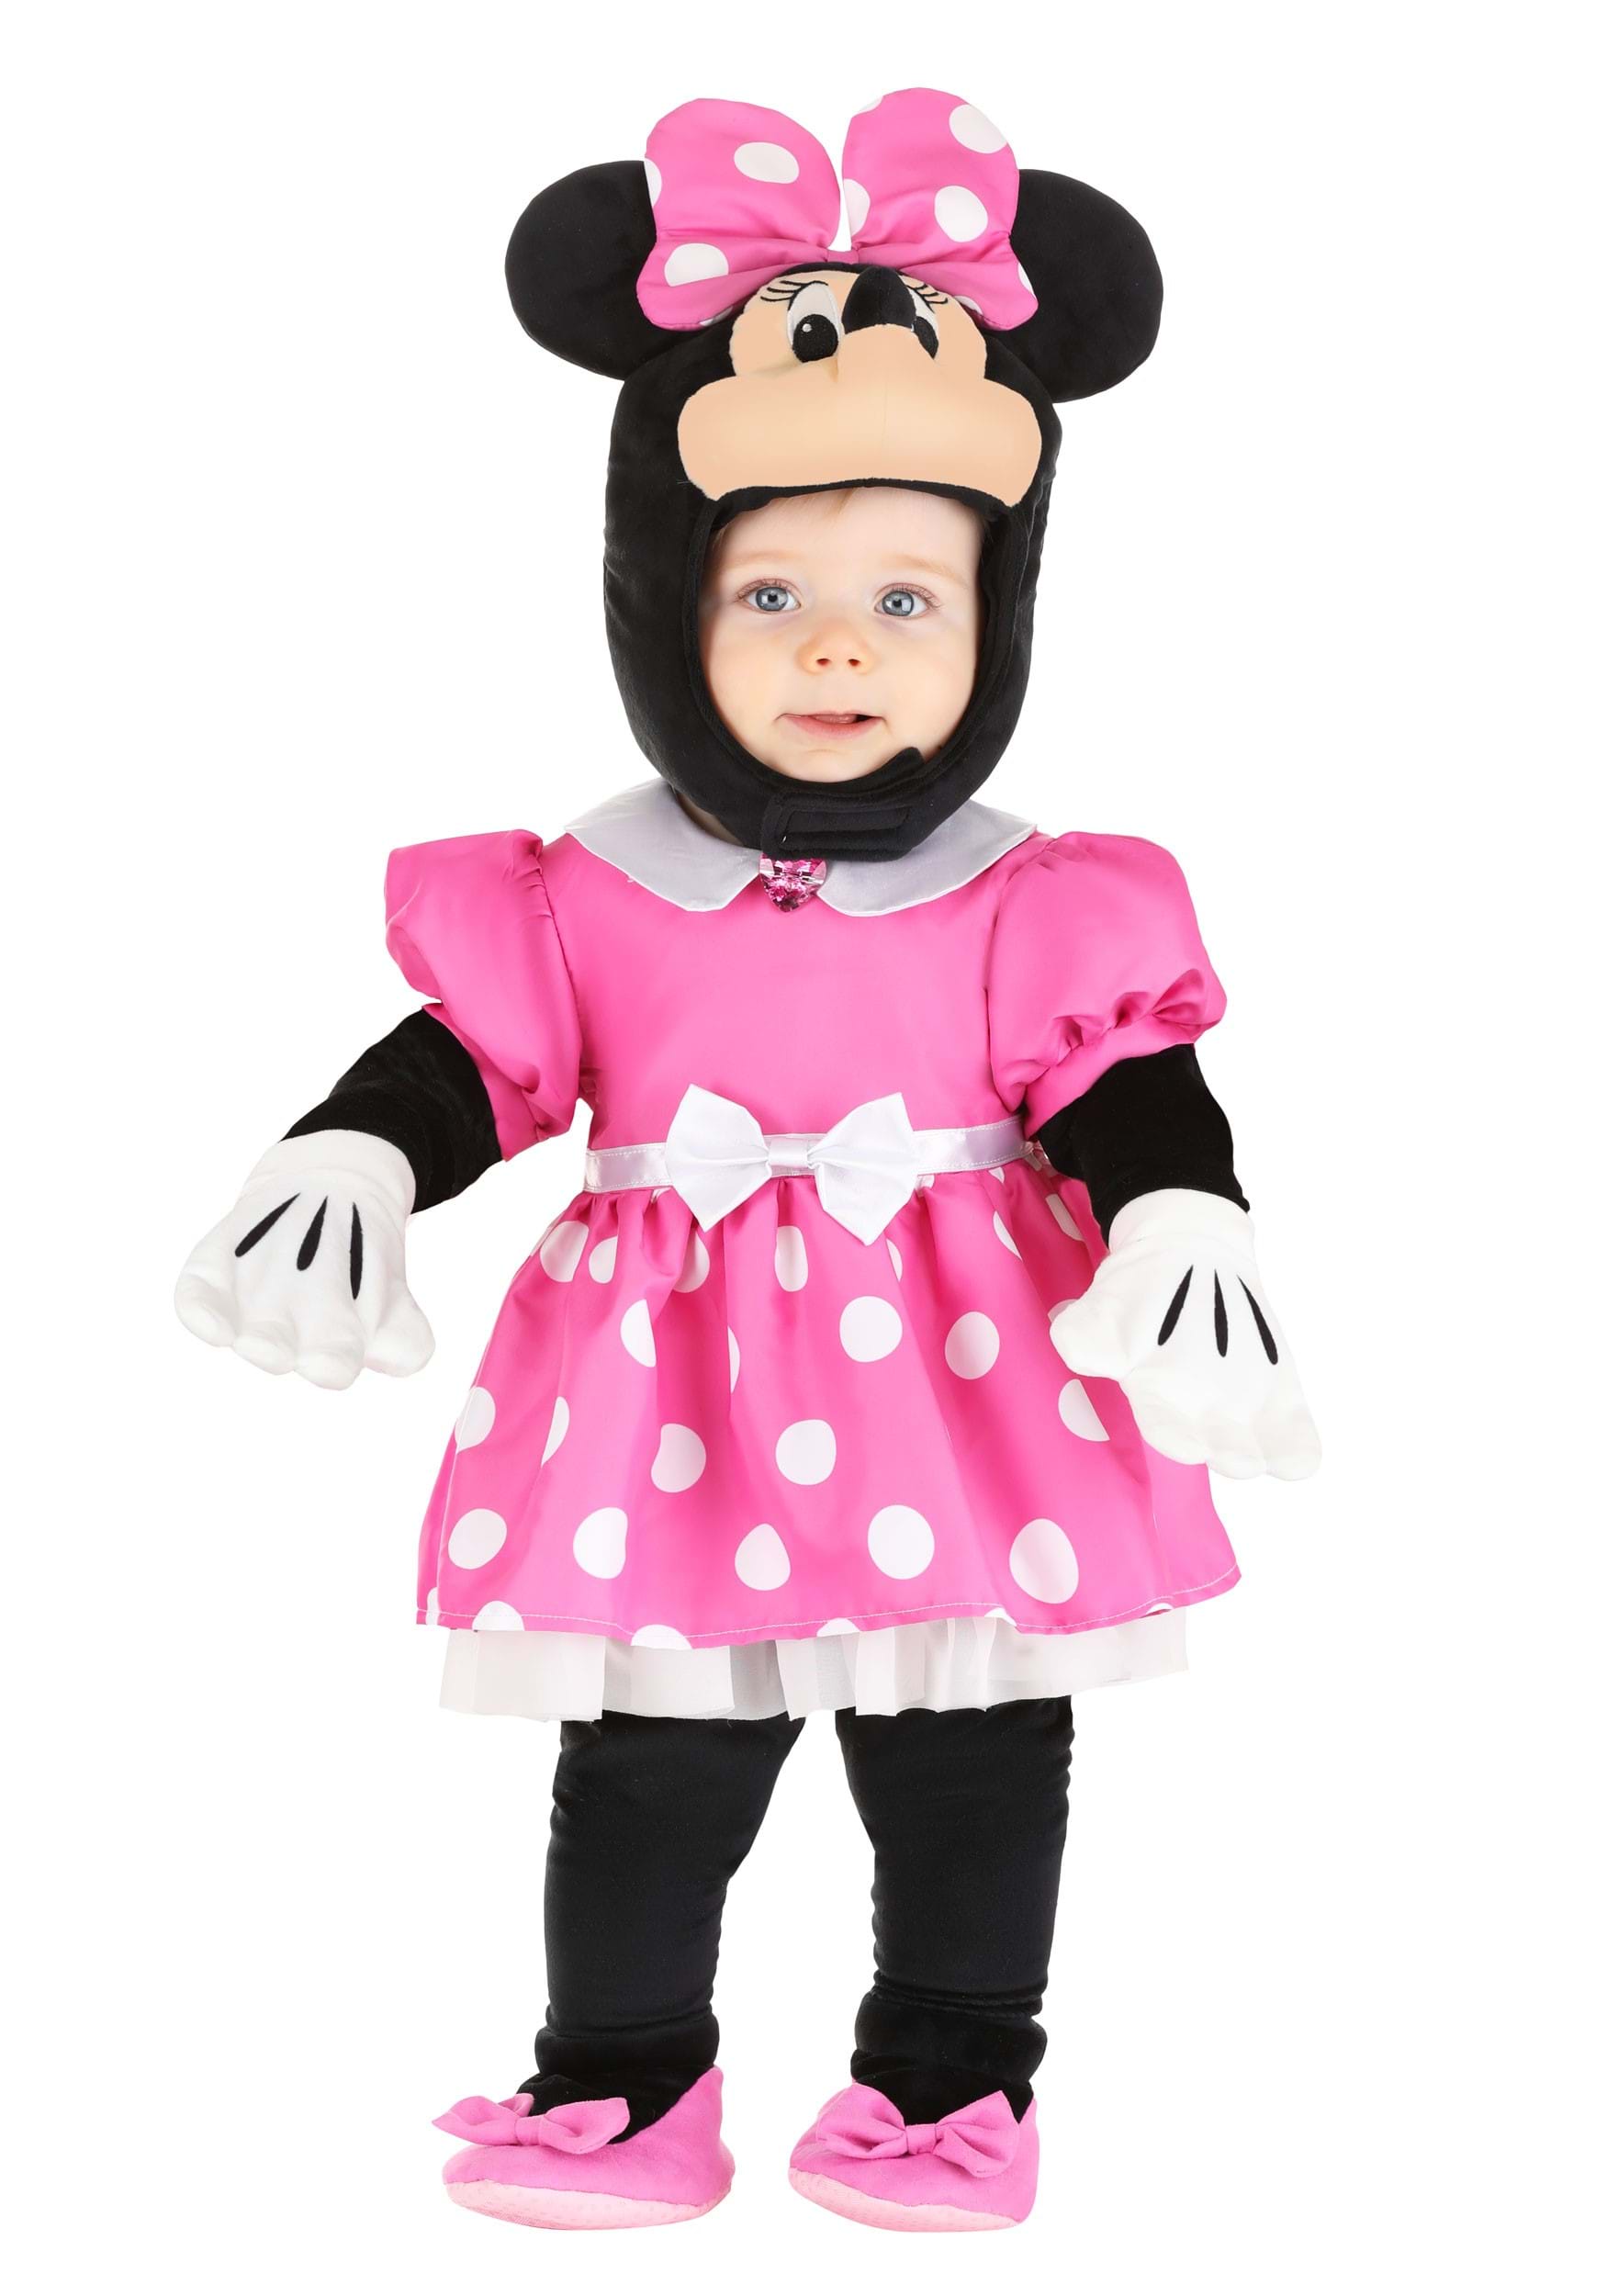 Photos - Fancy Dress FUN Costumes Sweet Minnie Mouse Infant Costume Black/Pink/White FU